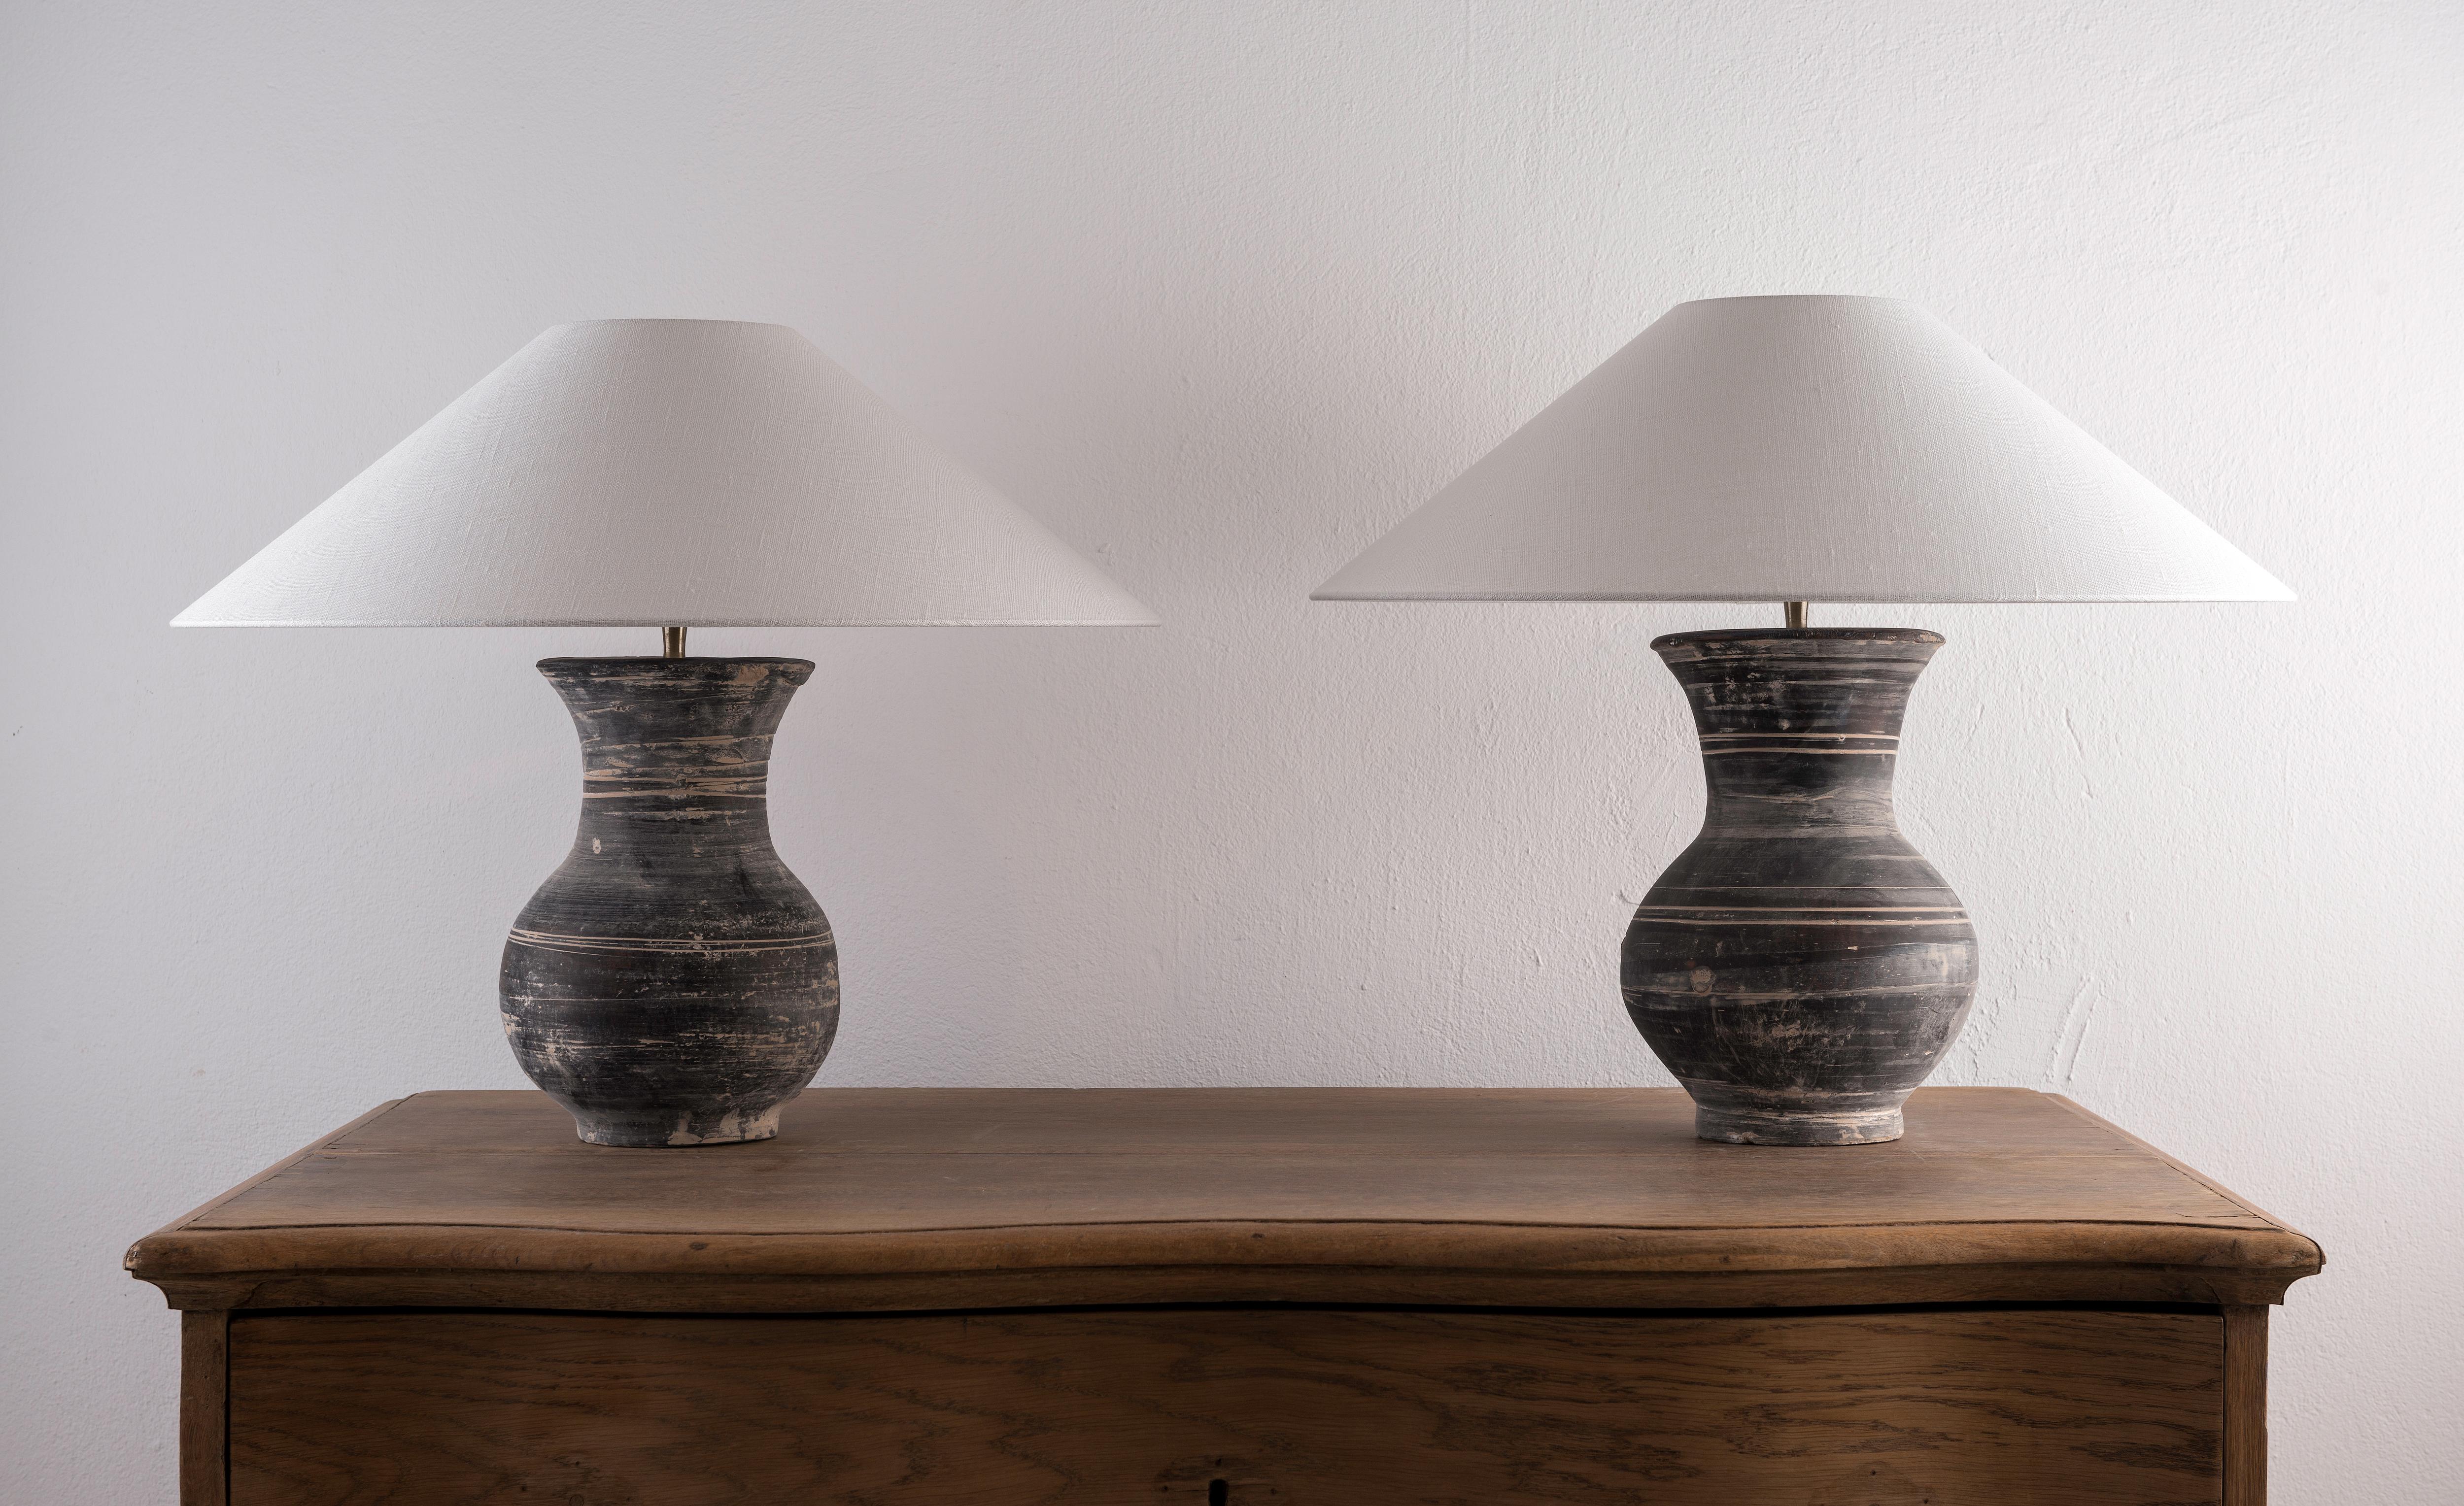 wooden table lamps for living room